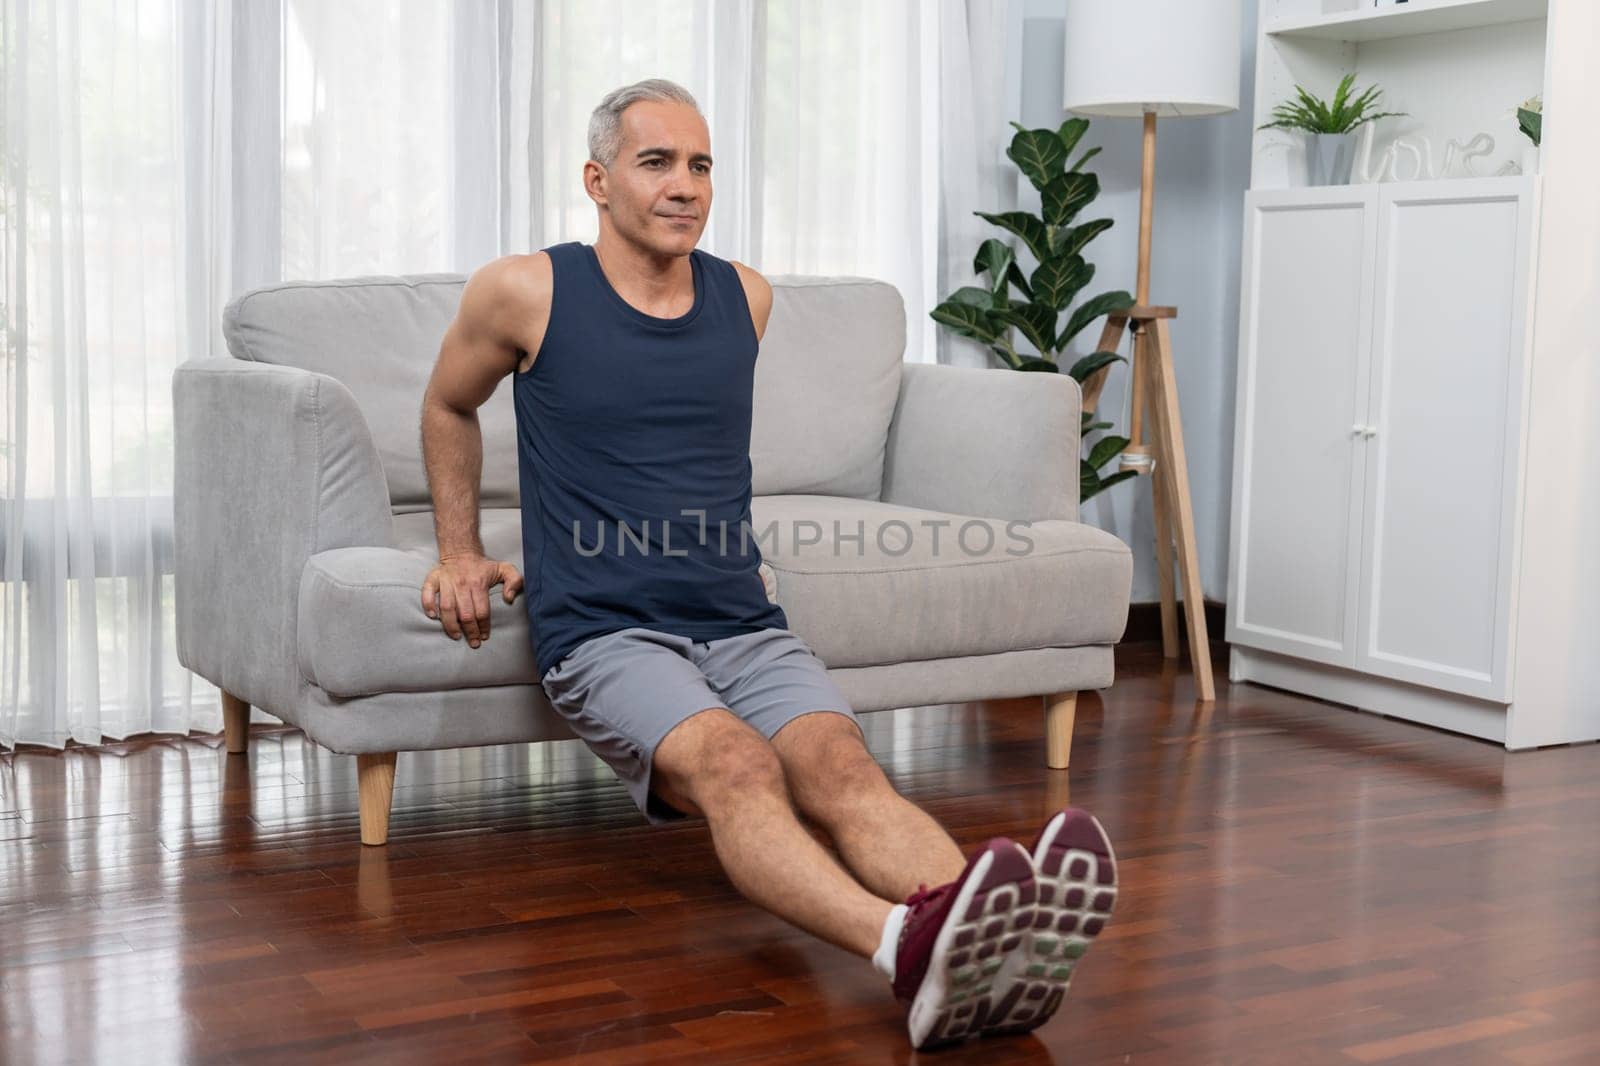 Athletic and active senior man using furniture for effective targeting muscle with push up at home exercise as concept of healthy fit body lifestyle after retirement. Clout